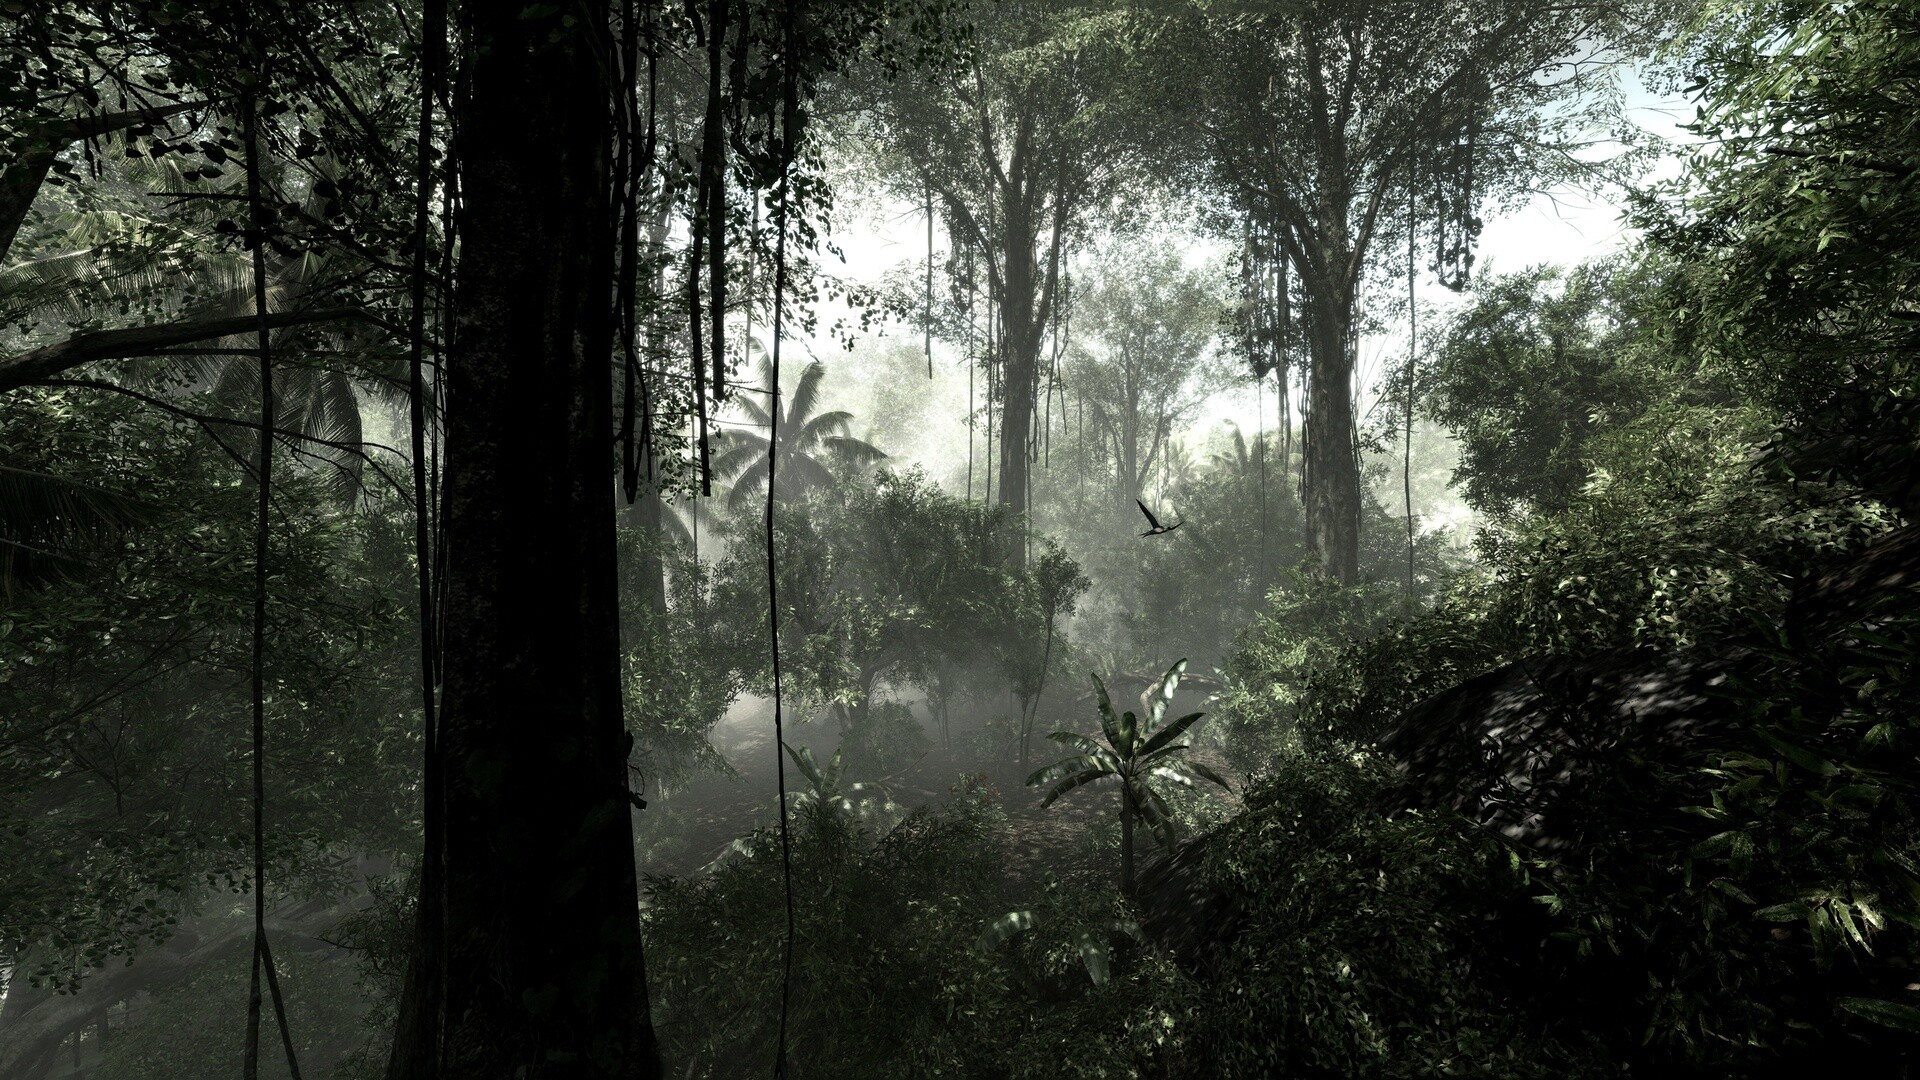 Jungle: An area located on the edge of rainforests, Middle of nowhere. 1920x1080 Full HD Wallpaper.